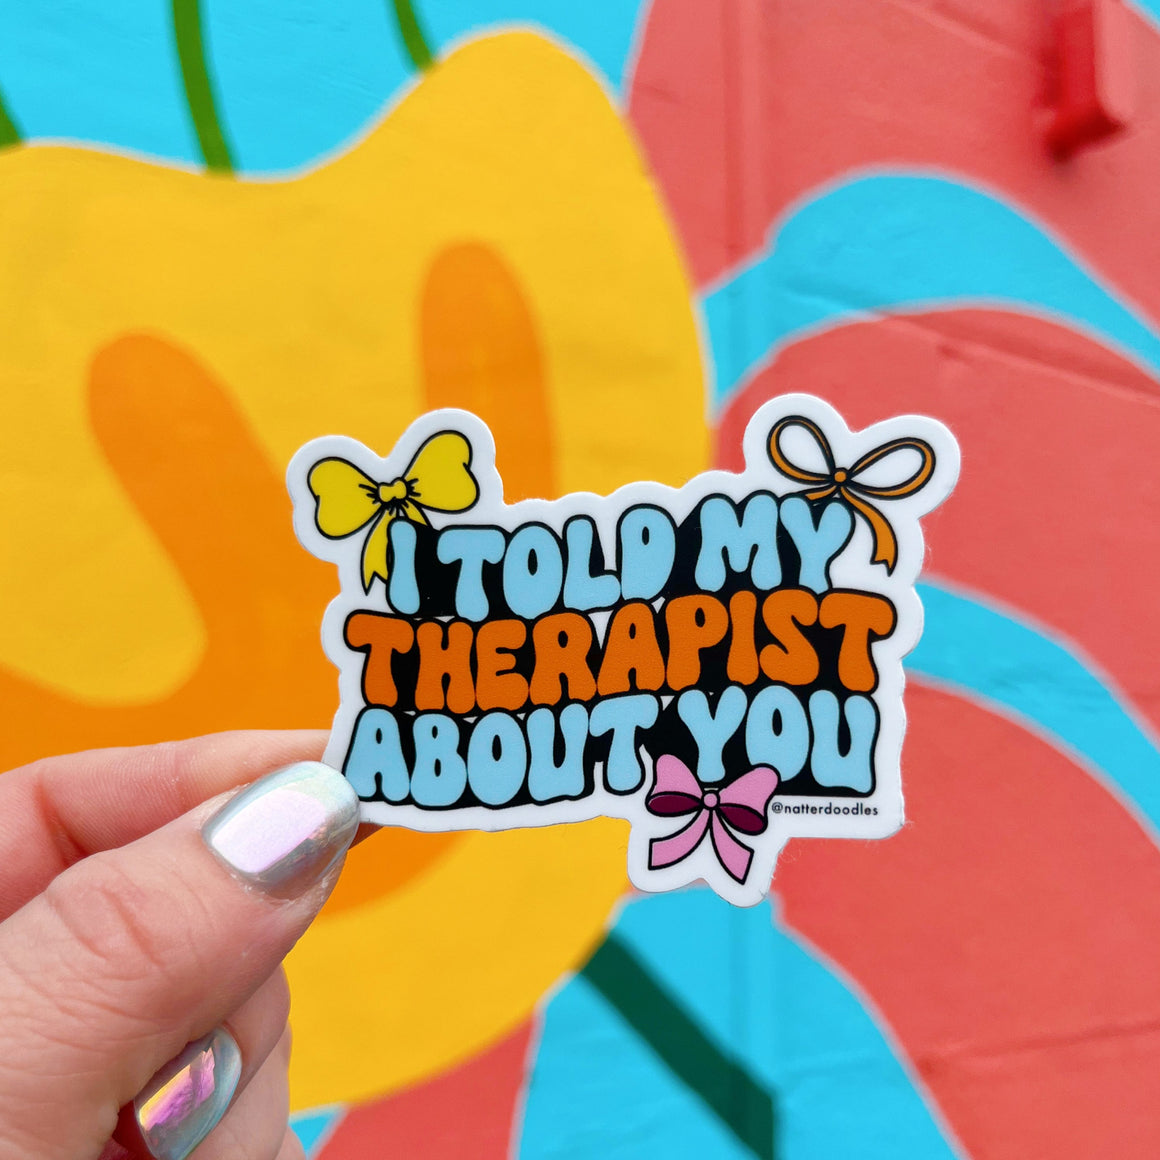 I Told My Therapist About You Sticker